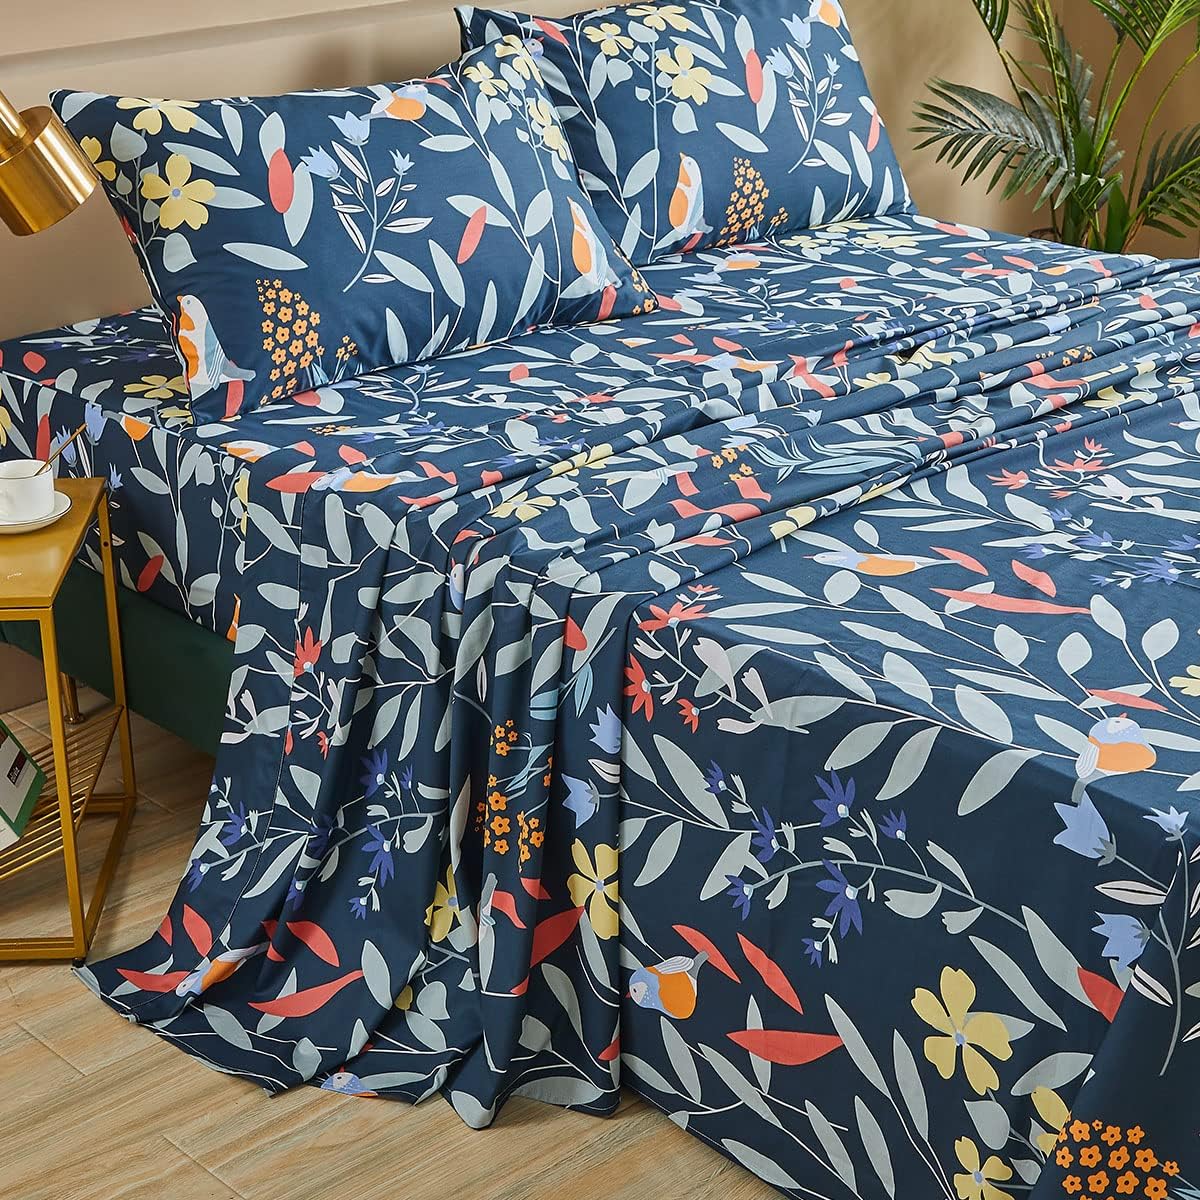 FADFAY Floral Leaves Sheet Set Queen, Premium 100% Cotton 600 TC Leaf Bed Sheets Bird Printed Navy Patterned Flower Farmhouse Bedding Botanical Branches Super Soft Luxury Deep Pocket Queen 4 Pcs